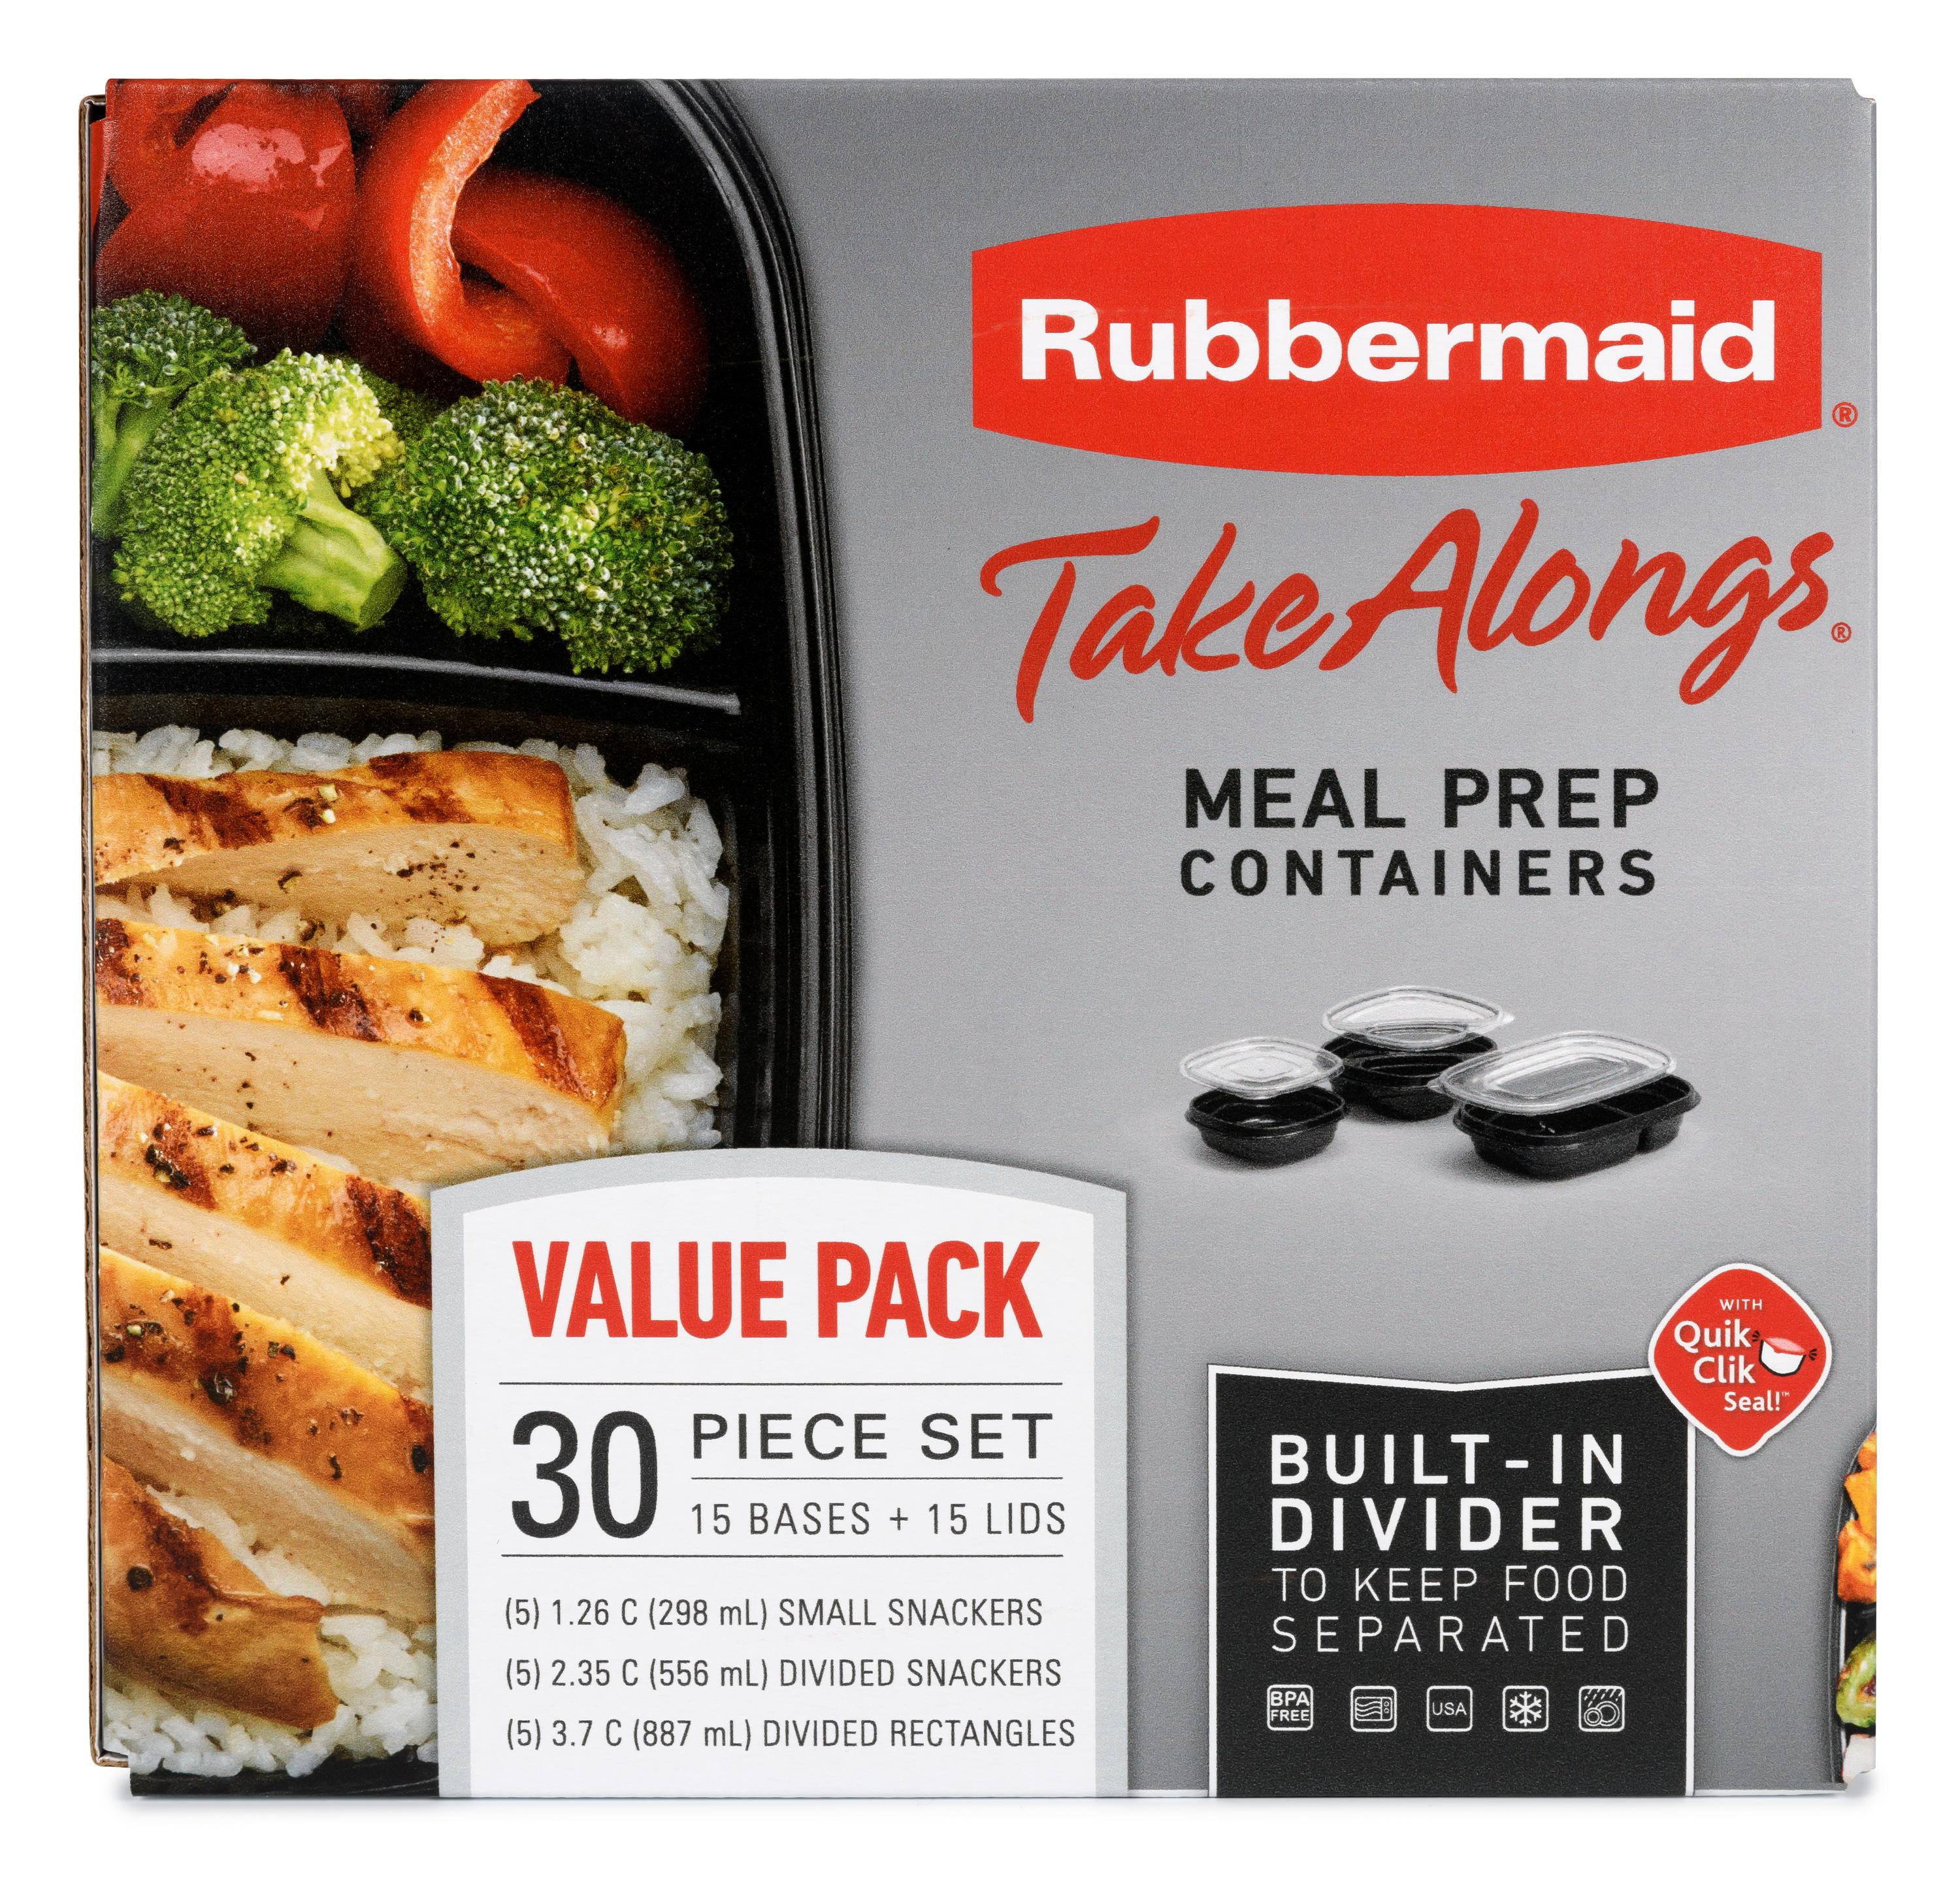 Rubbermaid Takealongs Meal Prep Containers 10 Pc. Set